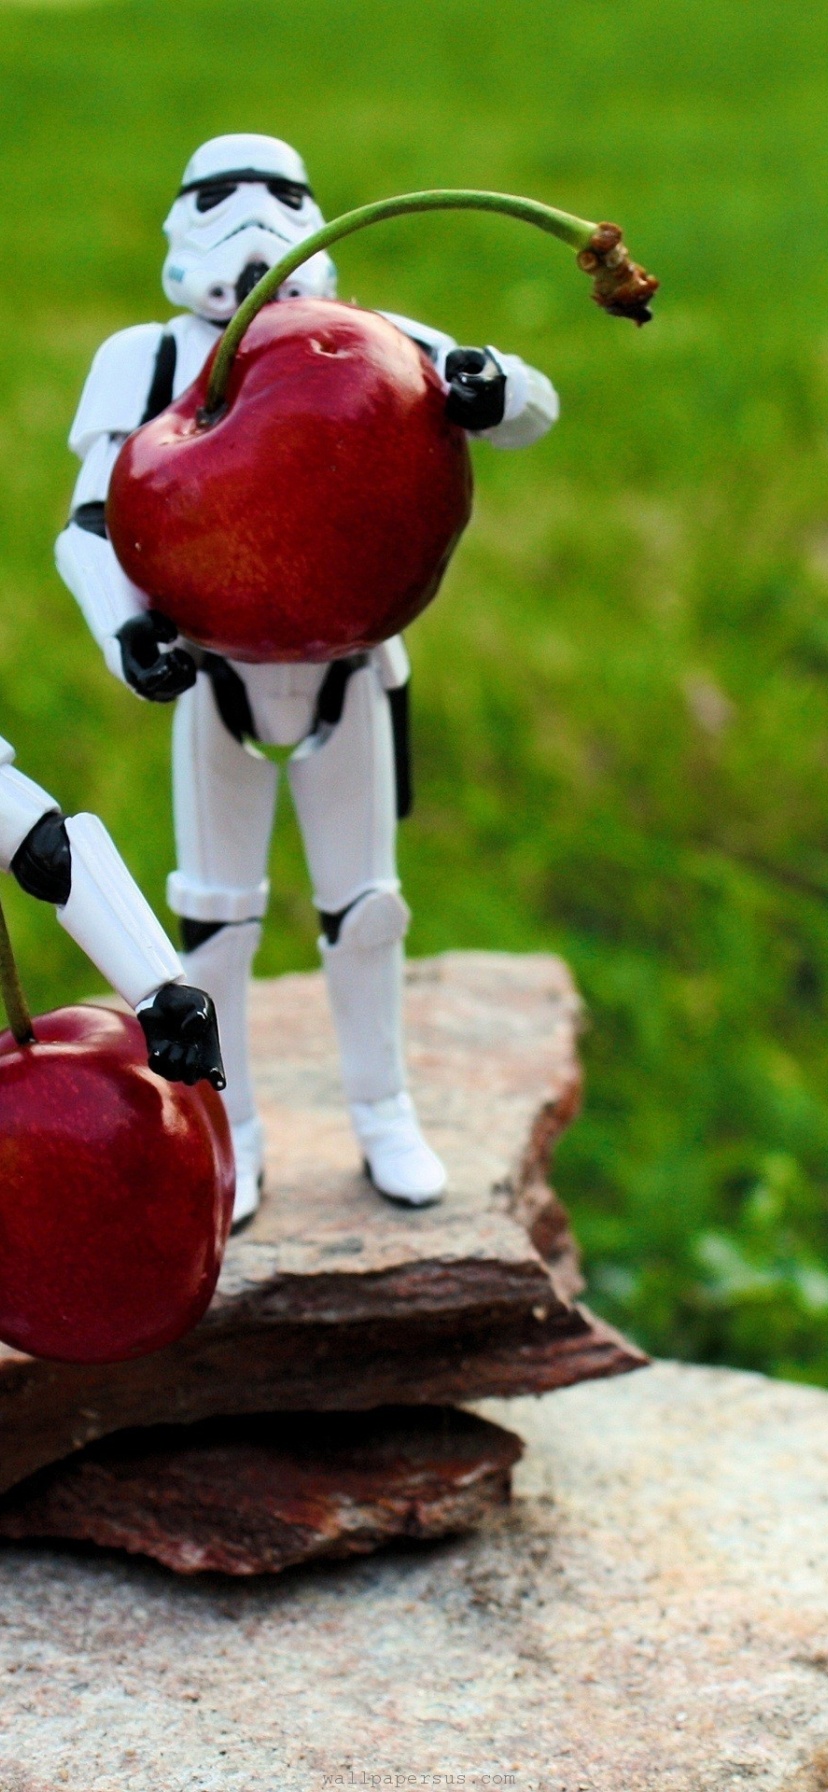 Stormtroopers Fruits Funny Toys Cherries